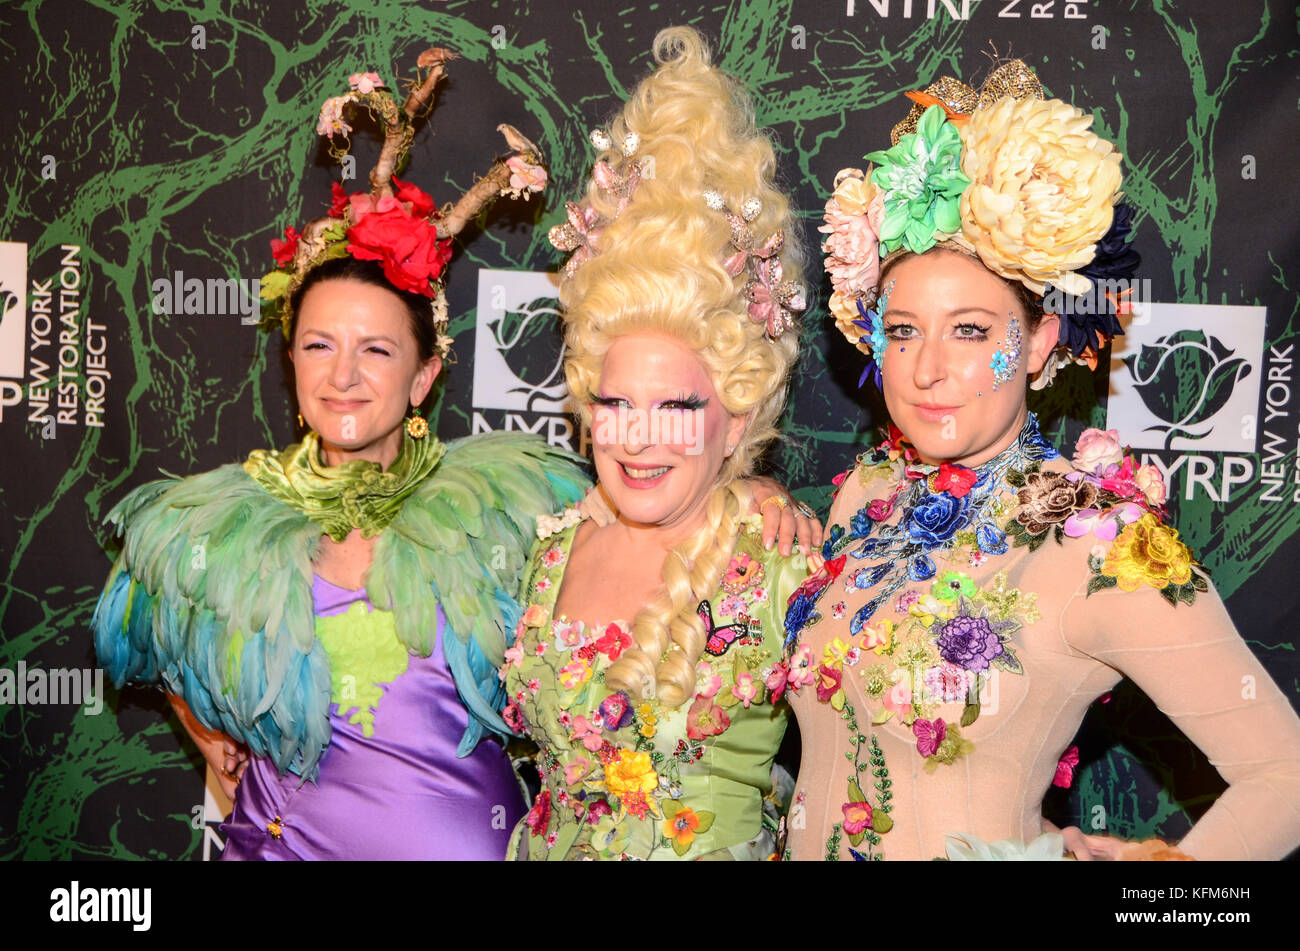 New York, NY, USA. 30th Oct, 2017. (L-R) Executive Director of NYRP Deborah Marton, Bette Midler, and her daughter Sophie von Haselberg, attend Bette Midler's Annual Hulaween Event Benefiting The New York Restoration Project, at the Cathedral of St. John the Divine on Monday, October 30, 2017 in New York. Credit: Raymond Hagans/Media Punch/Alamy Live News Stock Photo